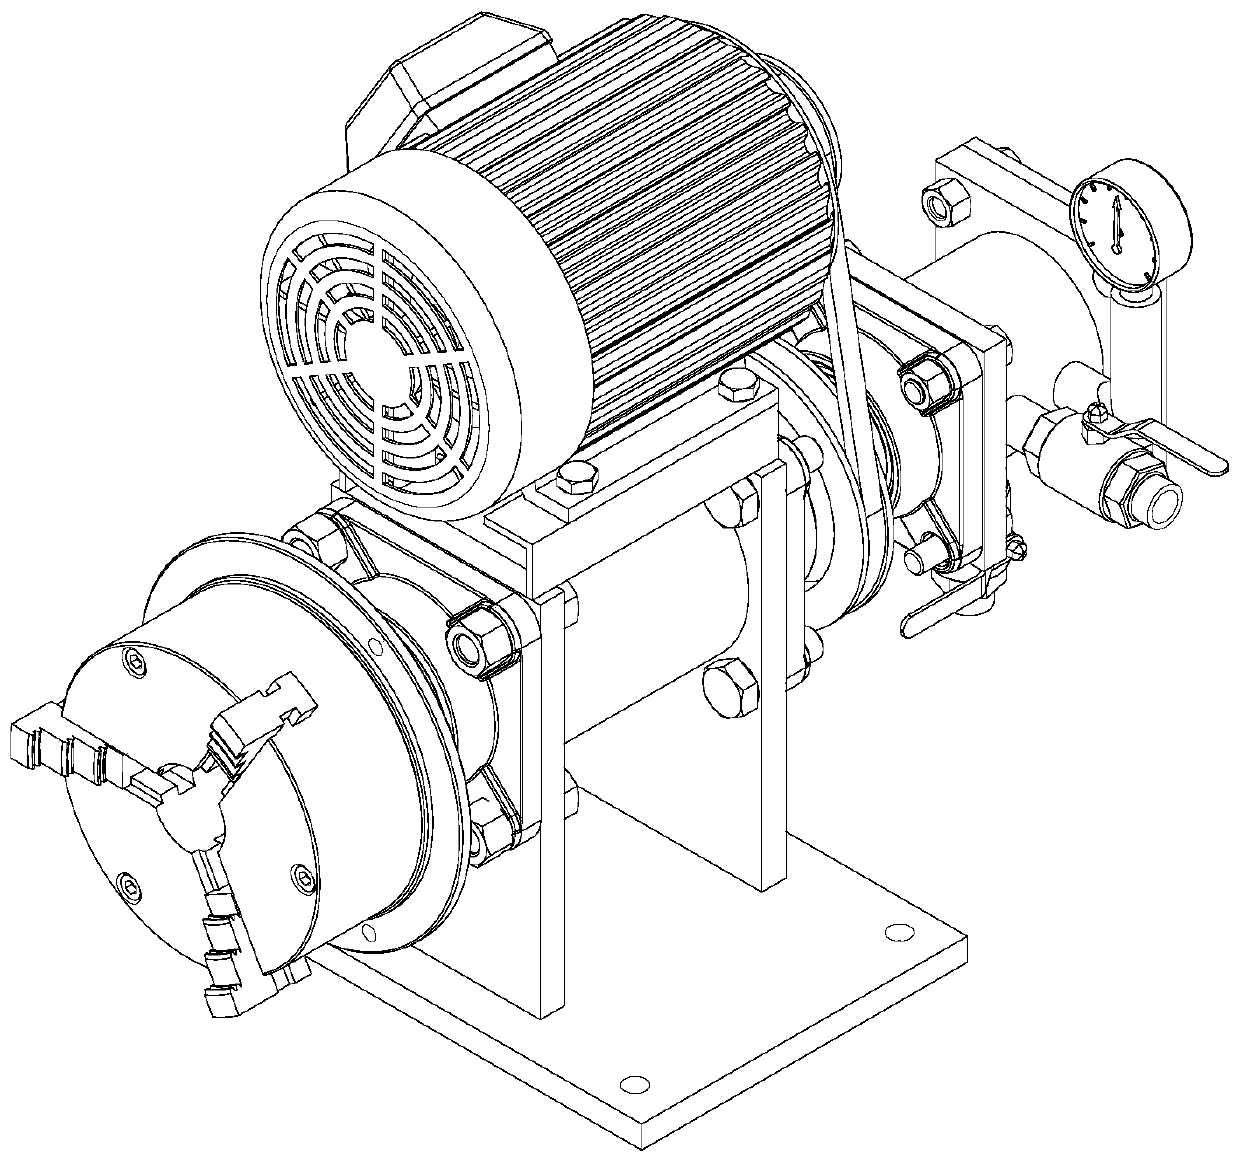 A metal wire drawing machine